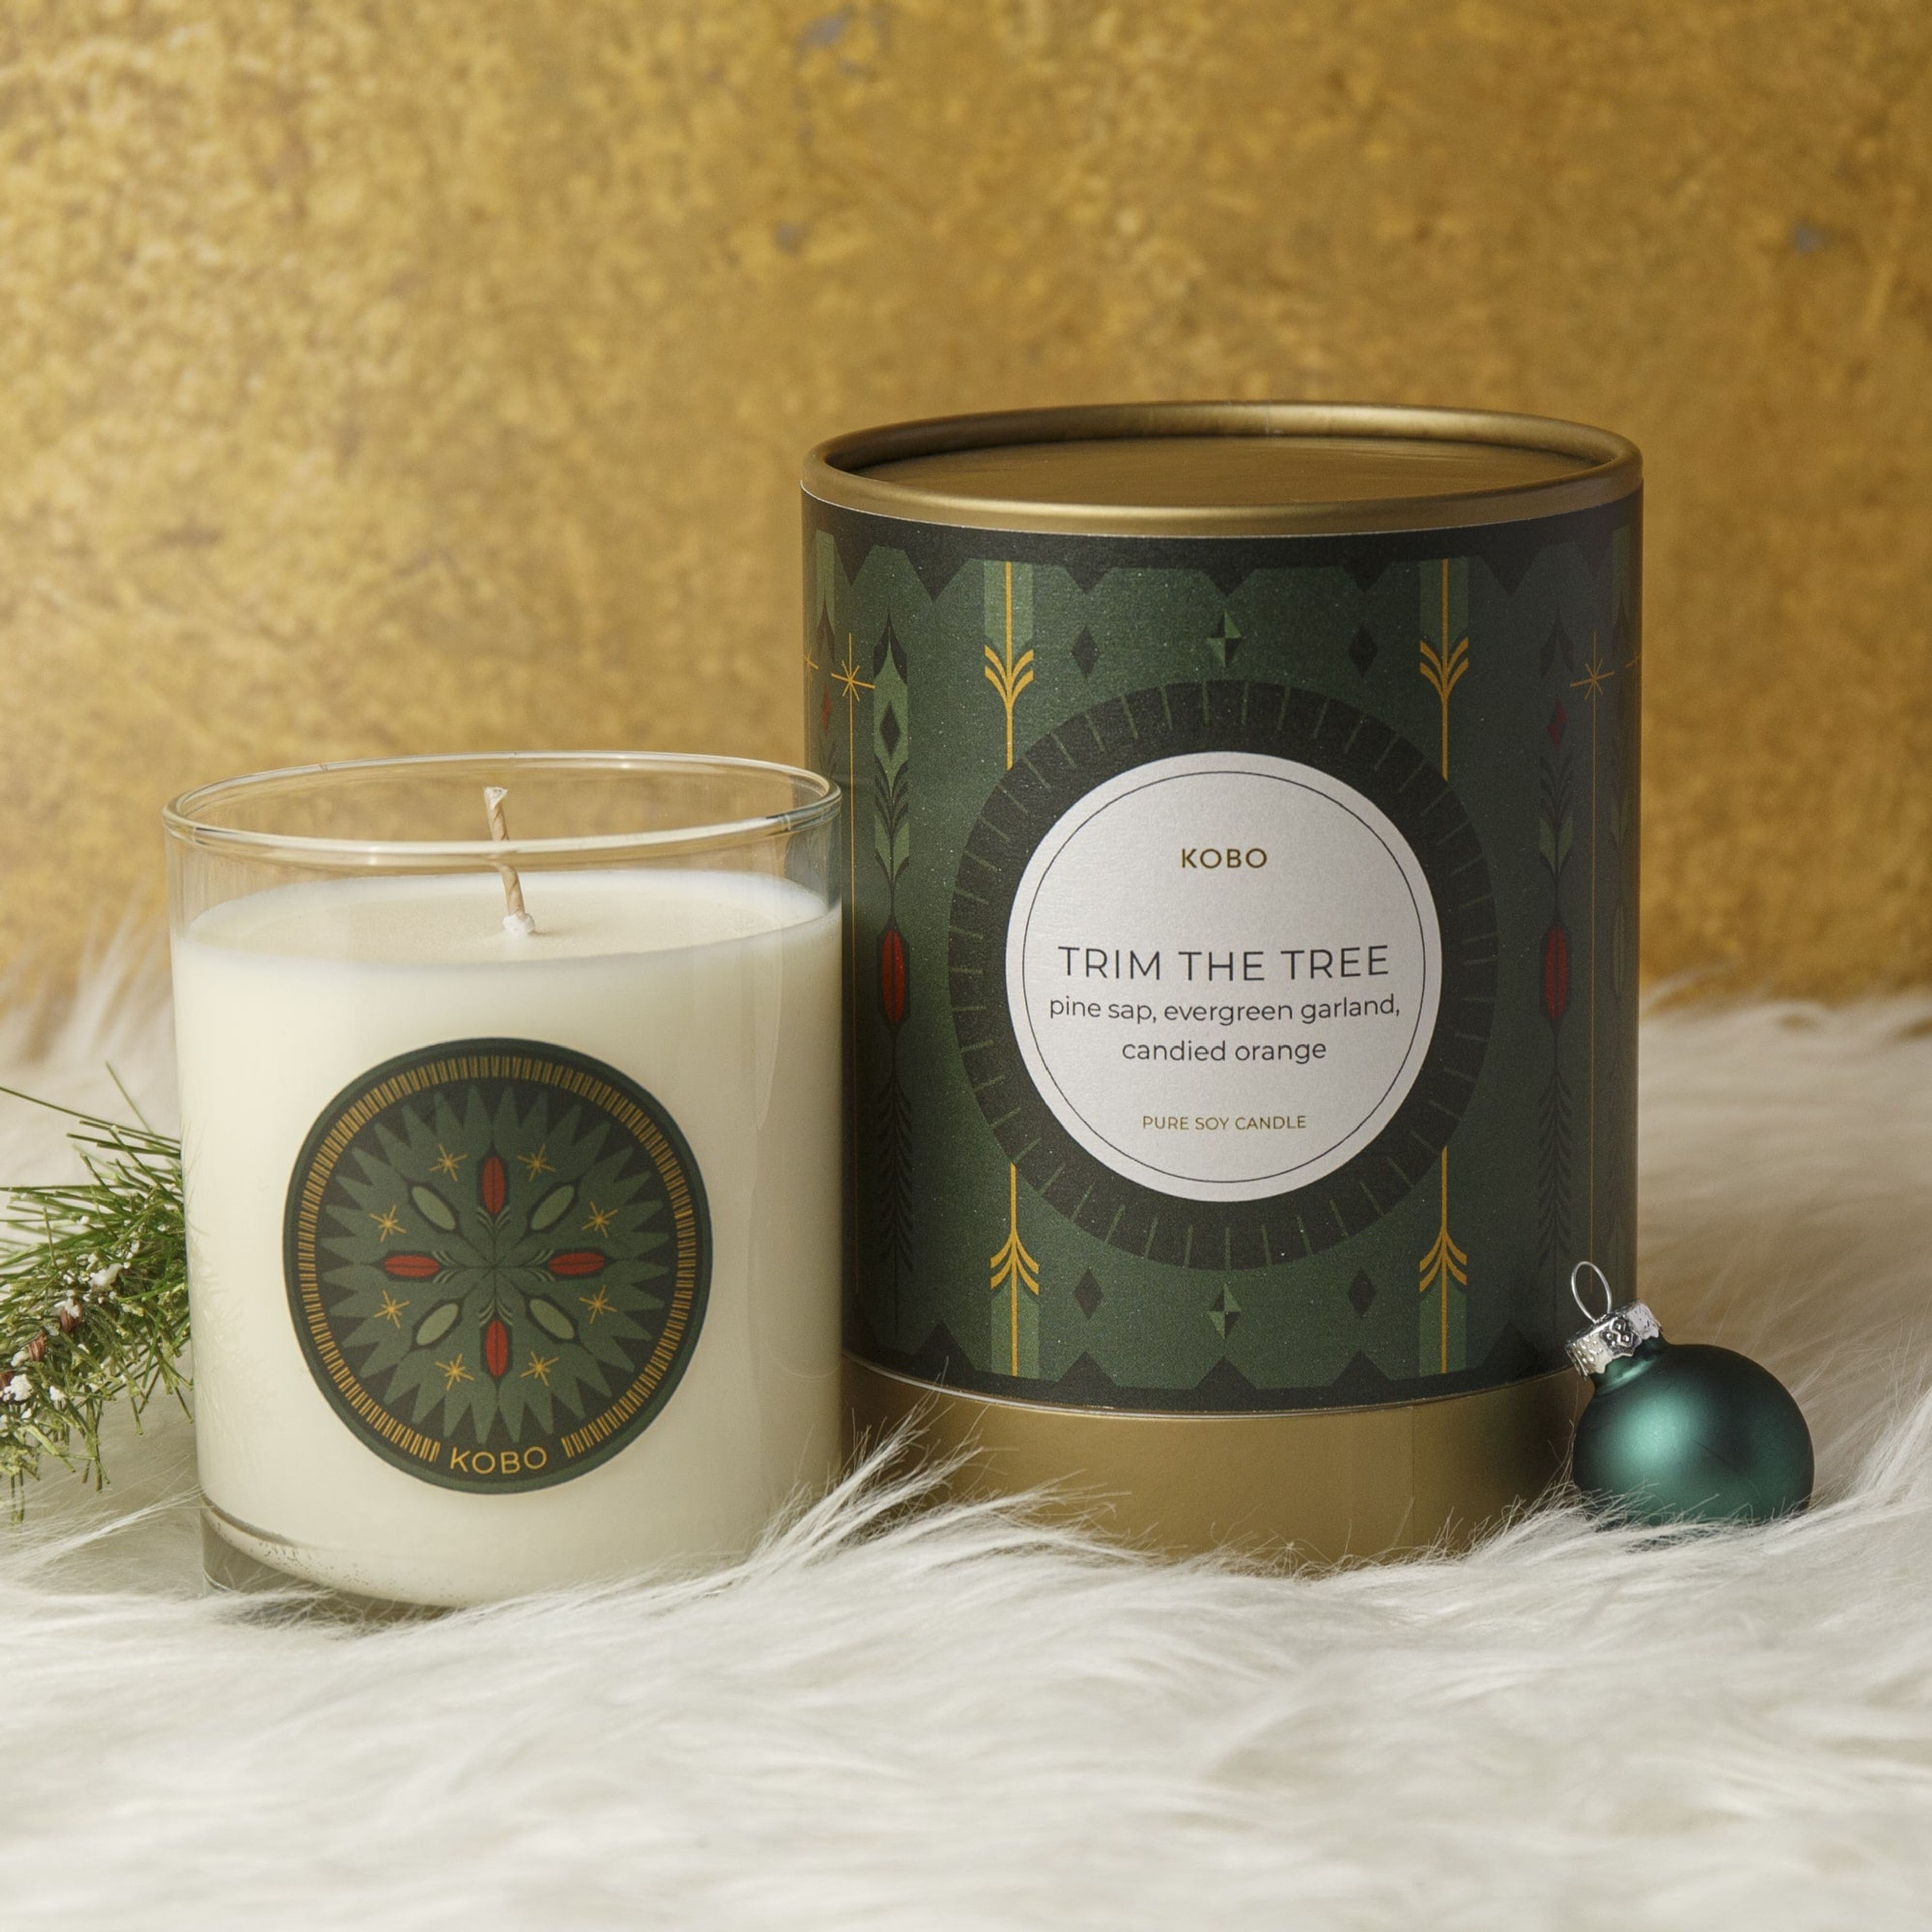 Trim the Tree Holiday 11 oz Pure Soy Candle